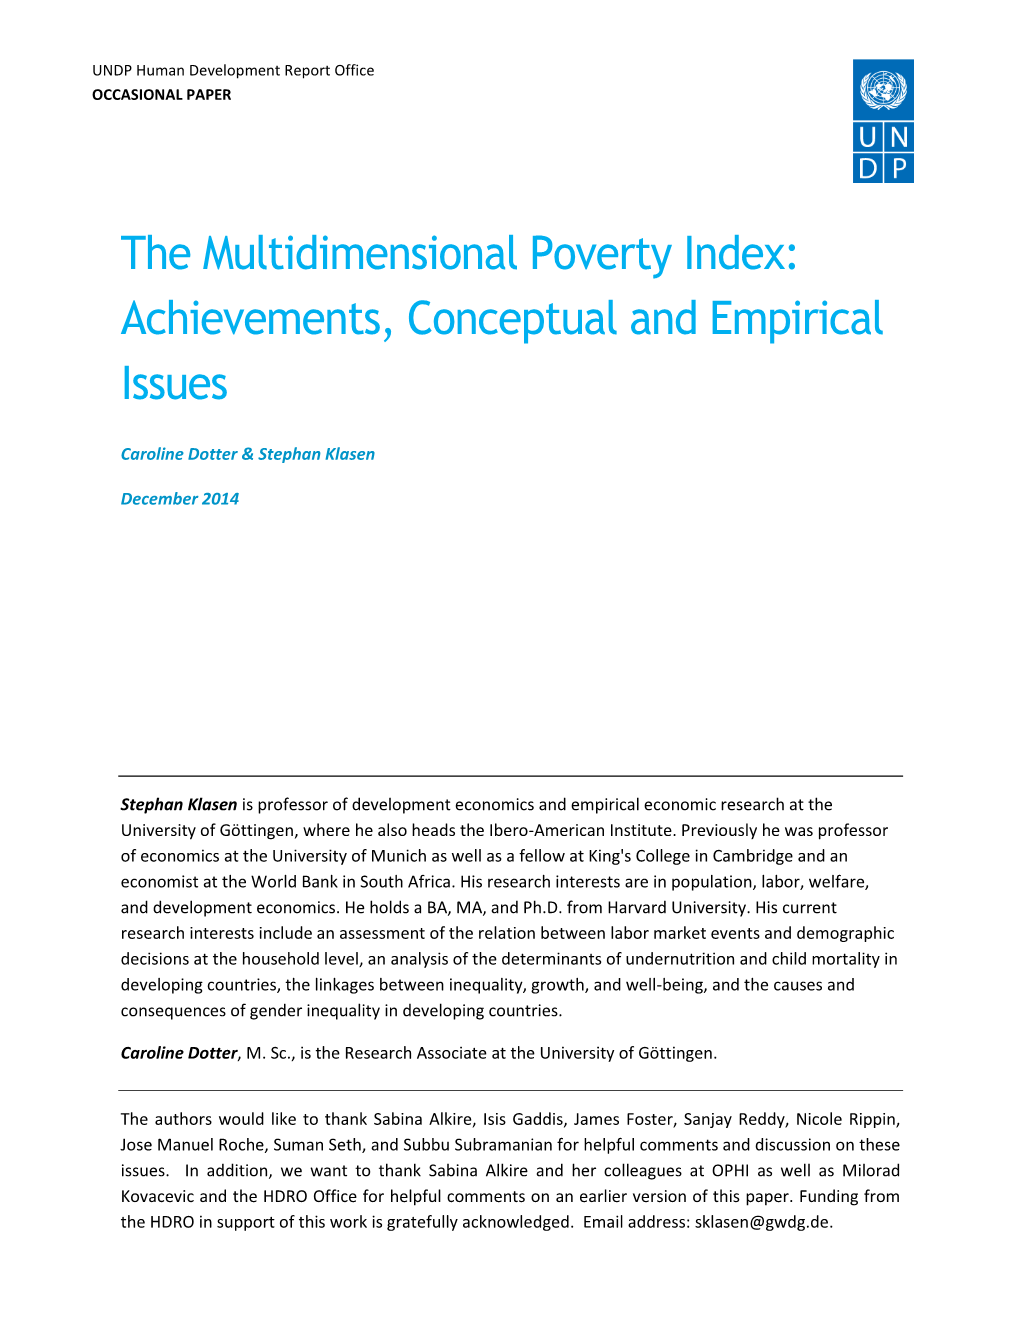 The Multidimensional Poverty Index: Achievements, Conceptual and Empirical Issues